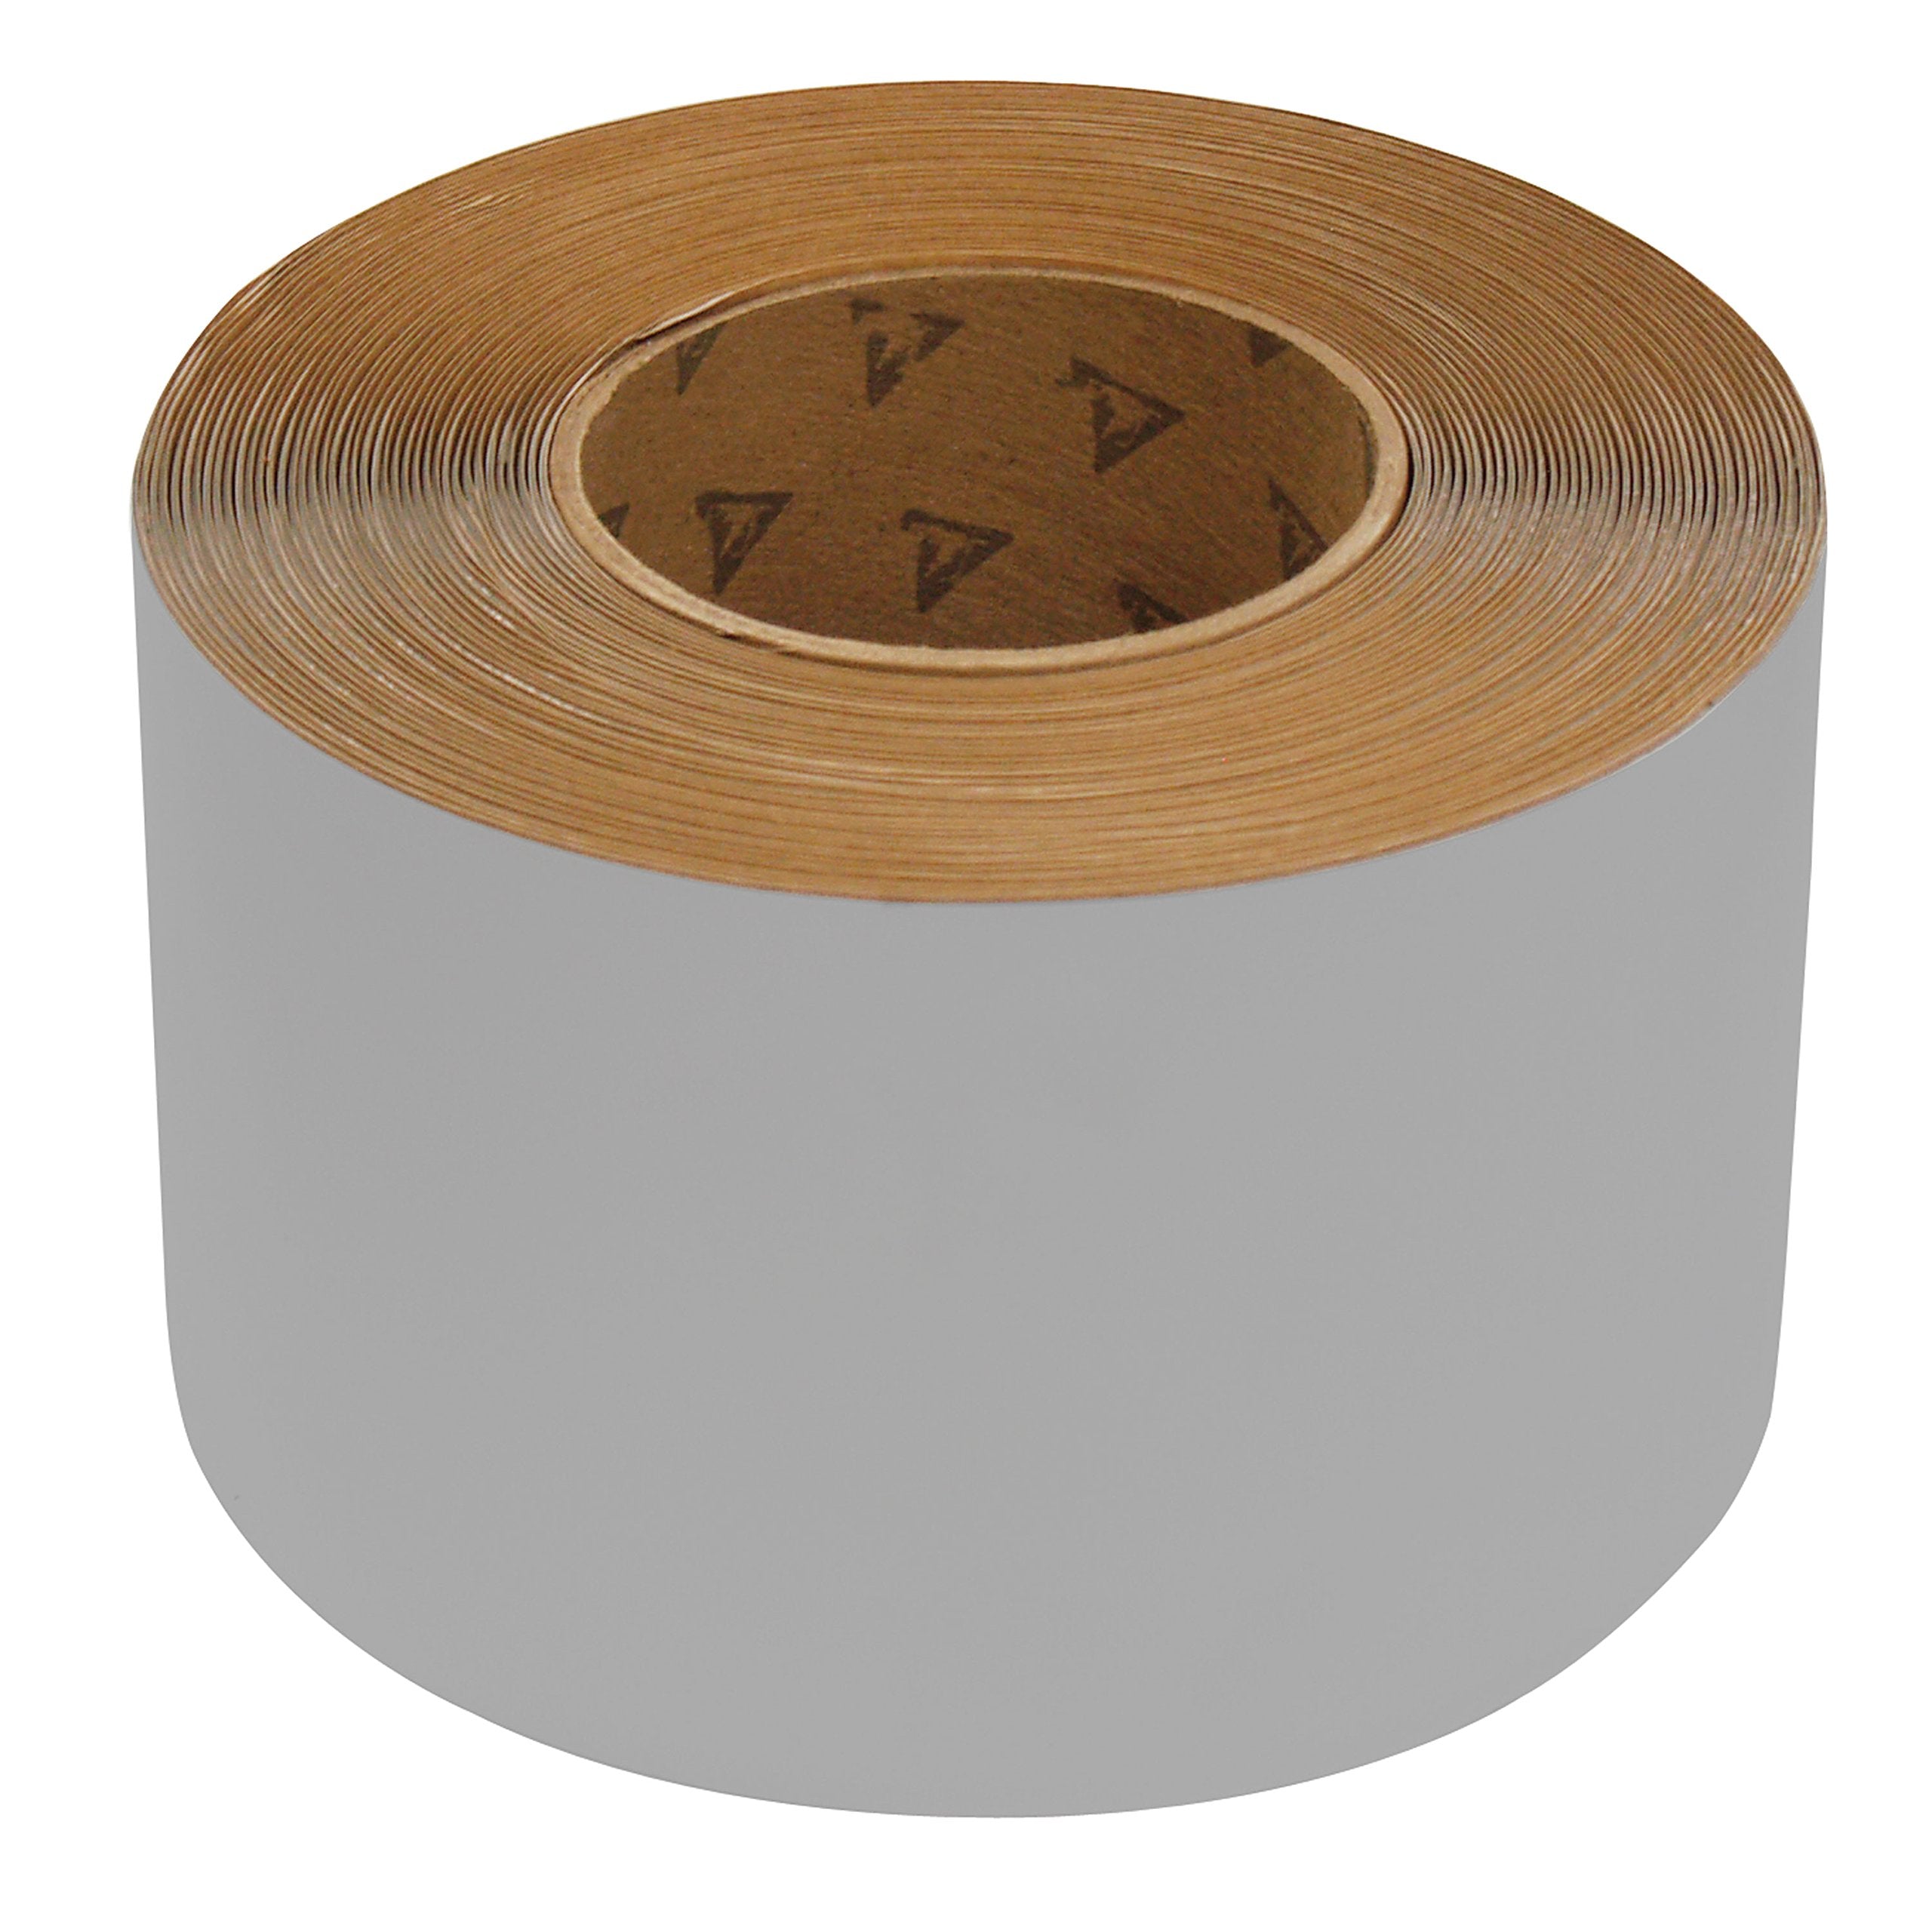 AP Products 017-413829 Sika Multiseal Plus Tape, Grey, 4 x 50 Roll (6 Cs.)